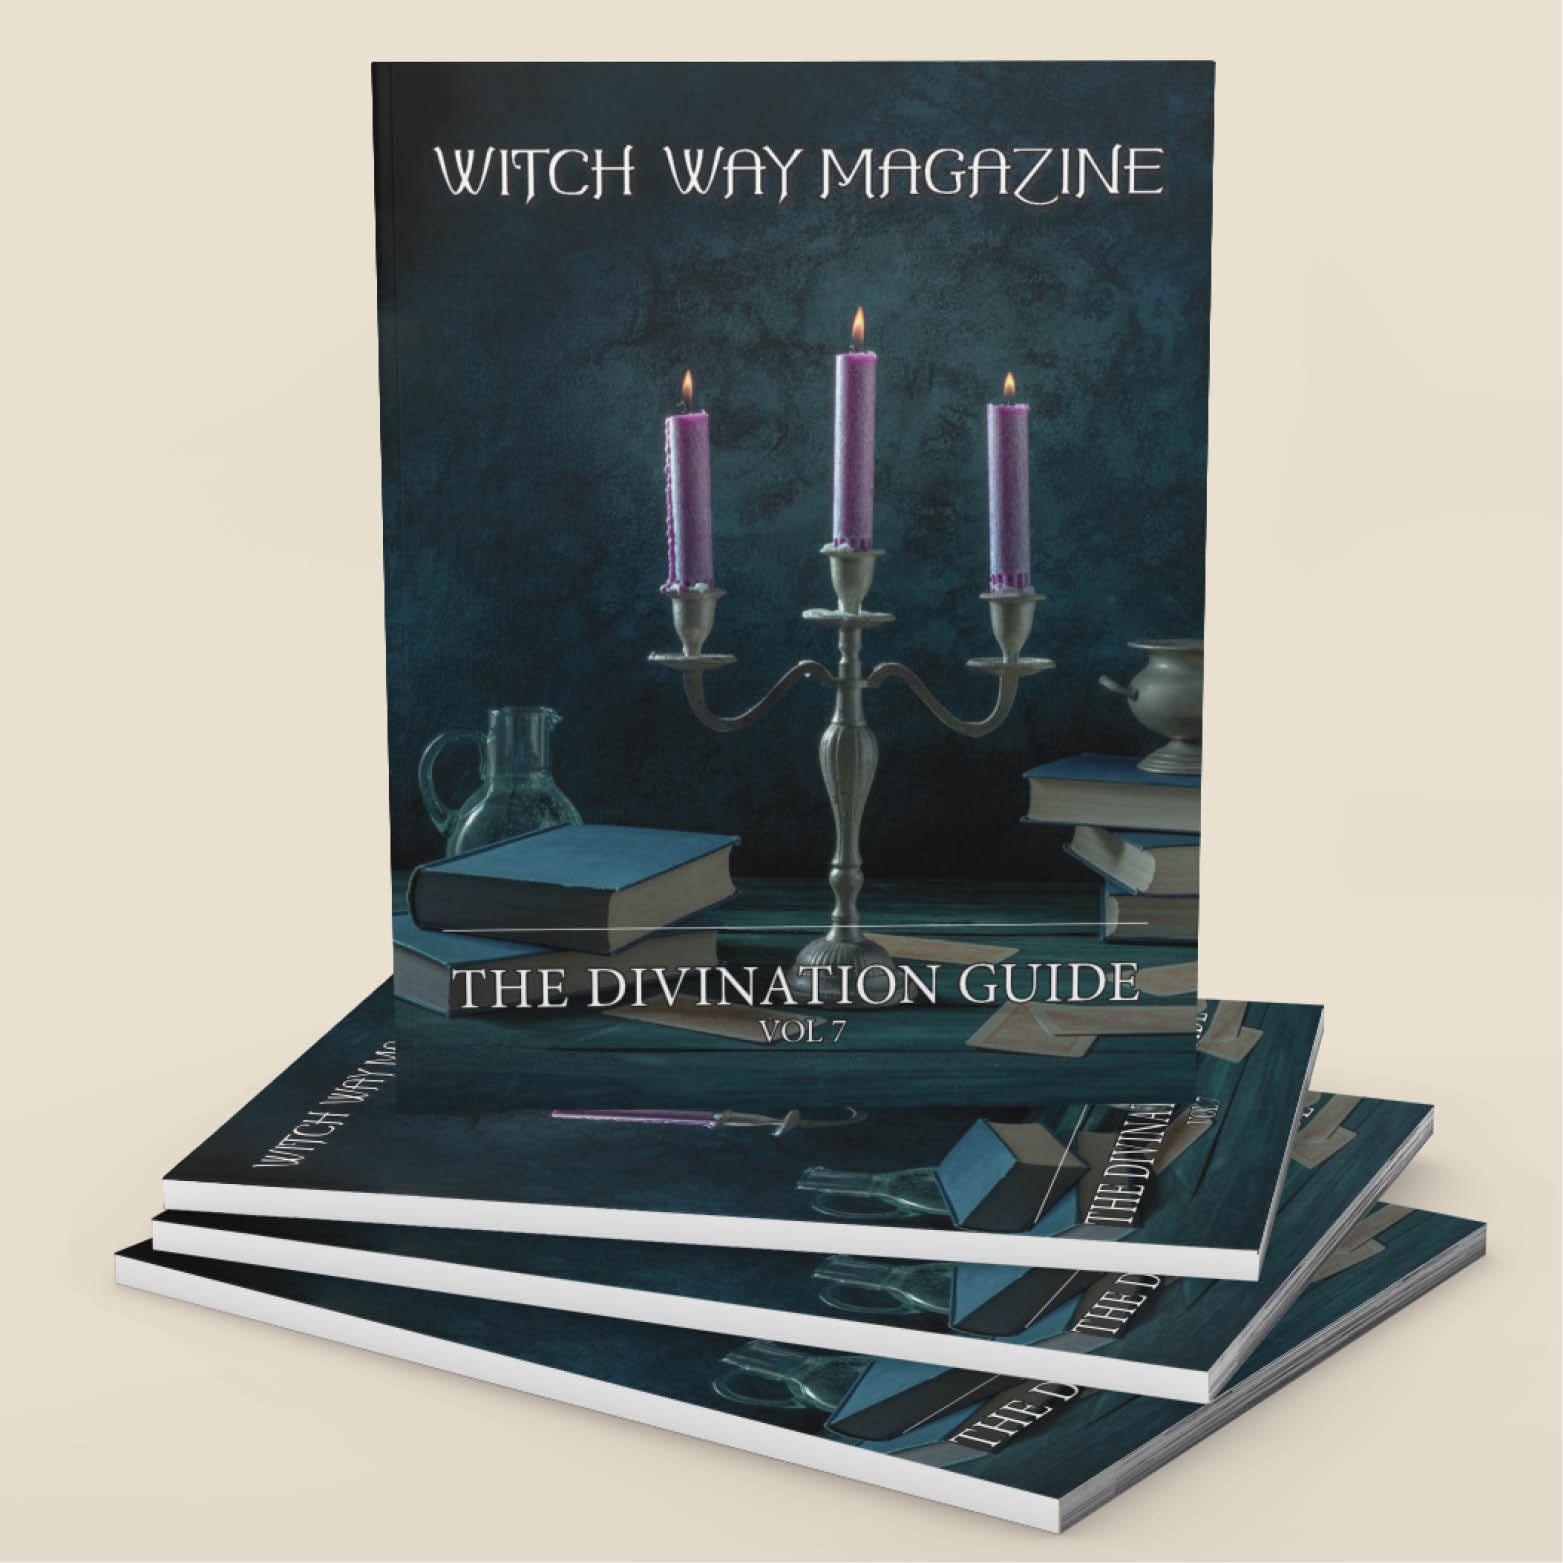 Witch Way Magazine 2022 Divination Guide -  Vol 7 - Printed